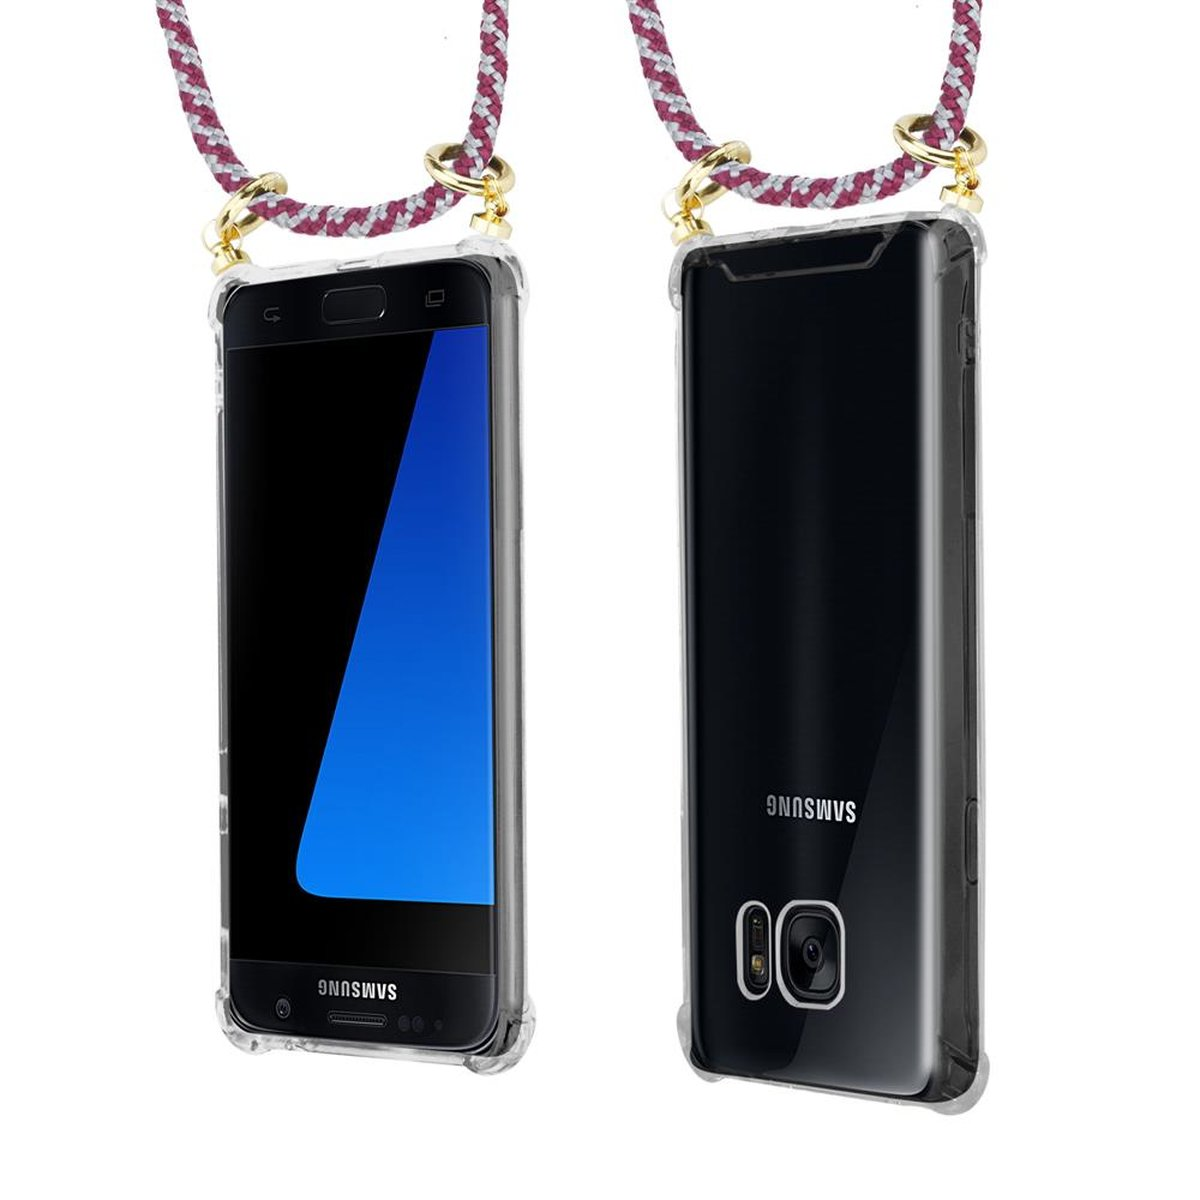 Samsung, WEIß Kette Gold Hülle, Band Ringen, und Backcover, Kordel CADORABO mit ROT S7, Handy abnehmbarer Galaxy